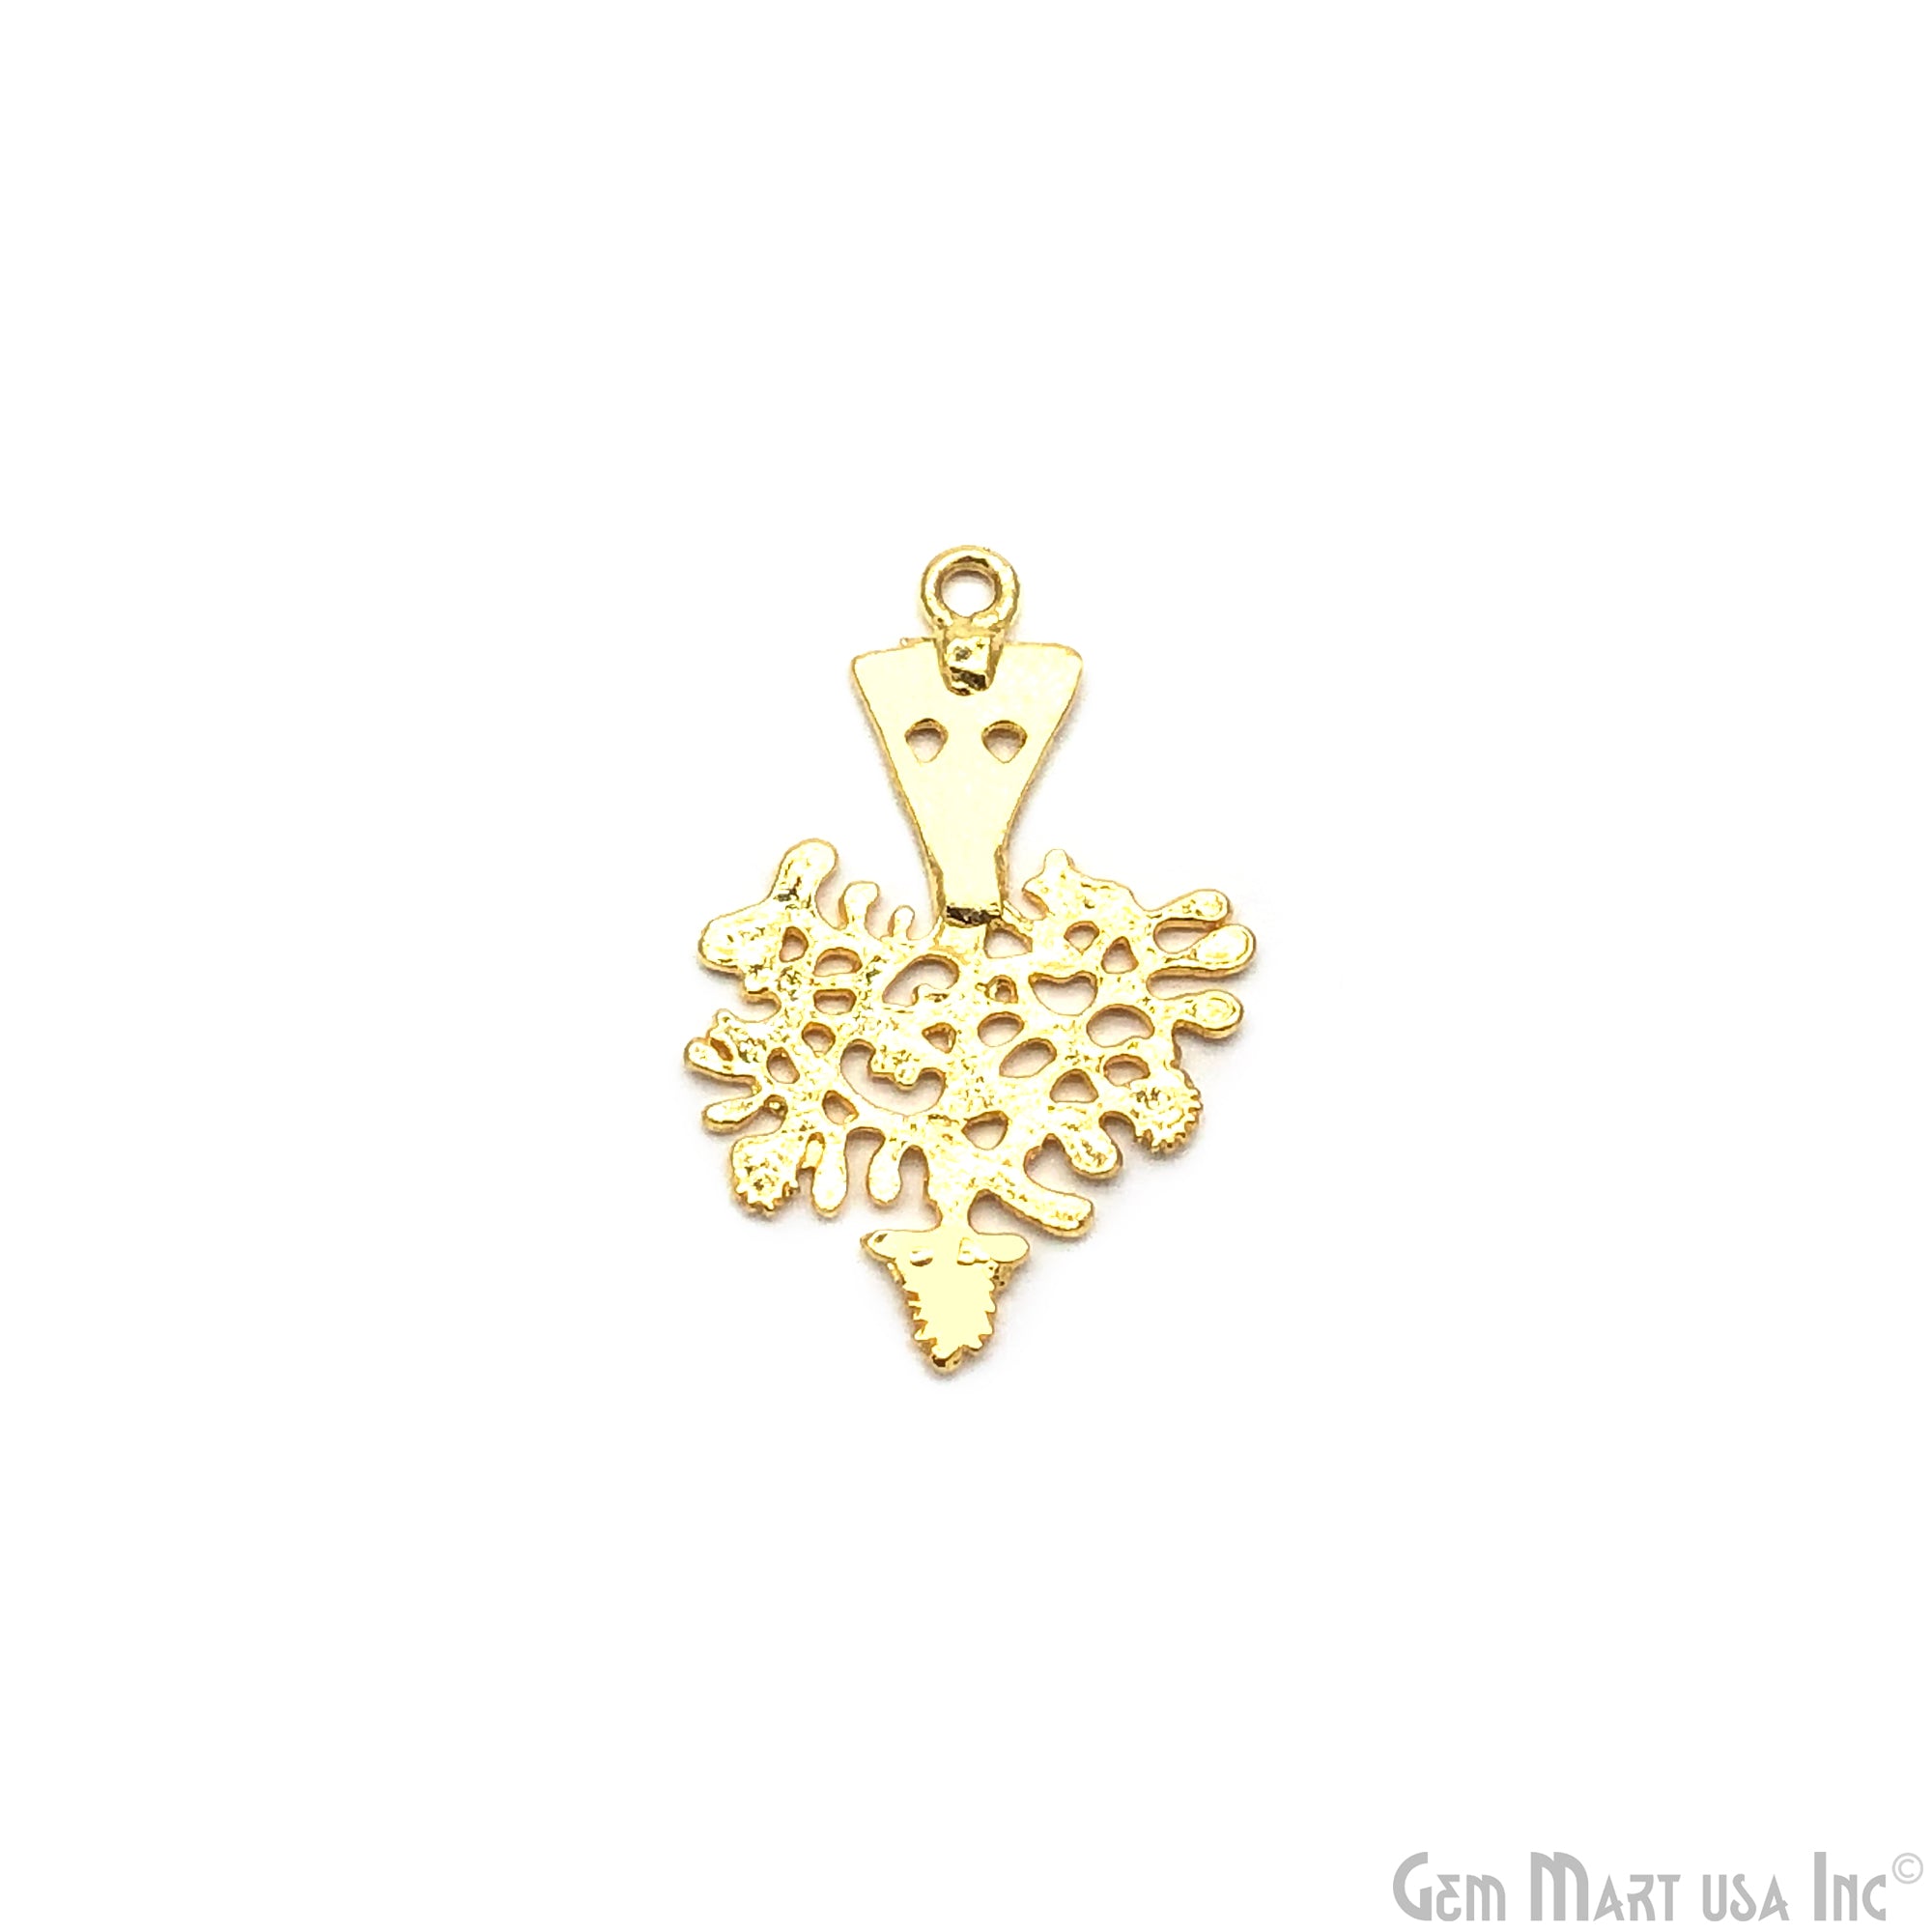 Tree Gold Plated Finding, Nature Jewelry Charms, Bracelet Charm, Pendant Necklace, Earring Charms, Gold Jewelry Finding, 32x21mm